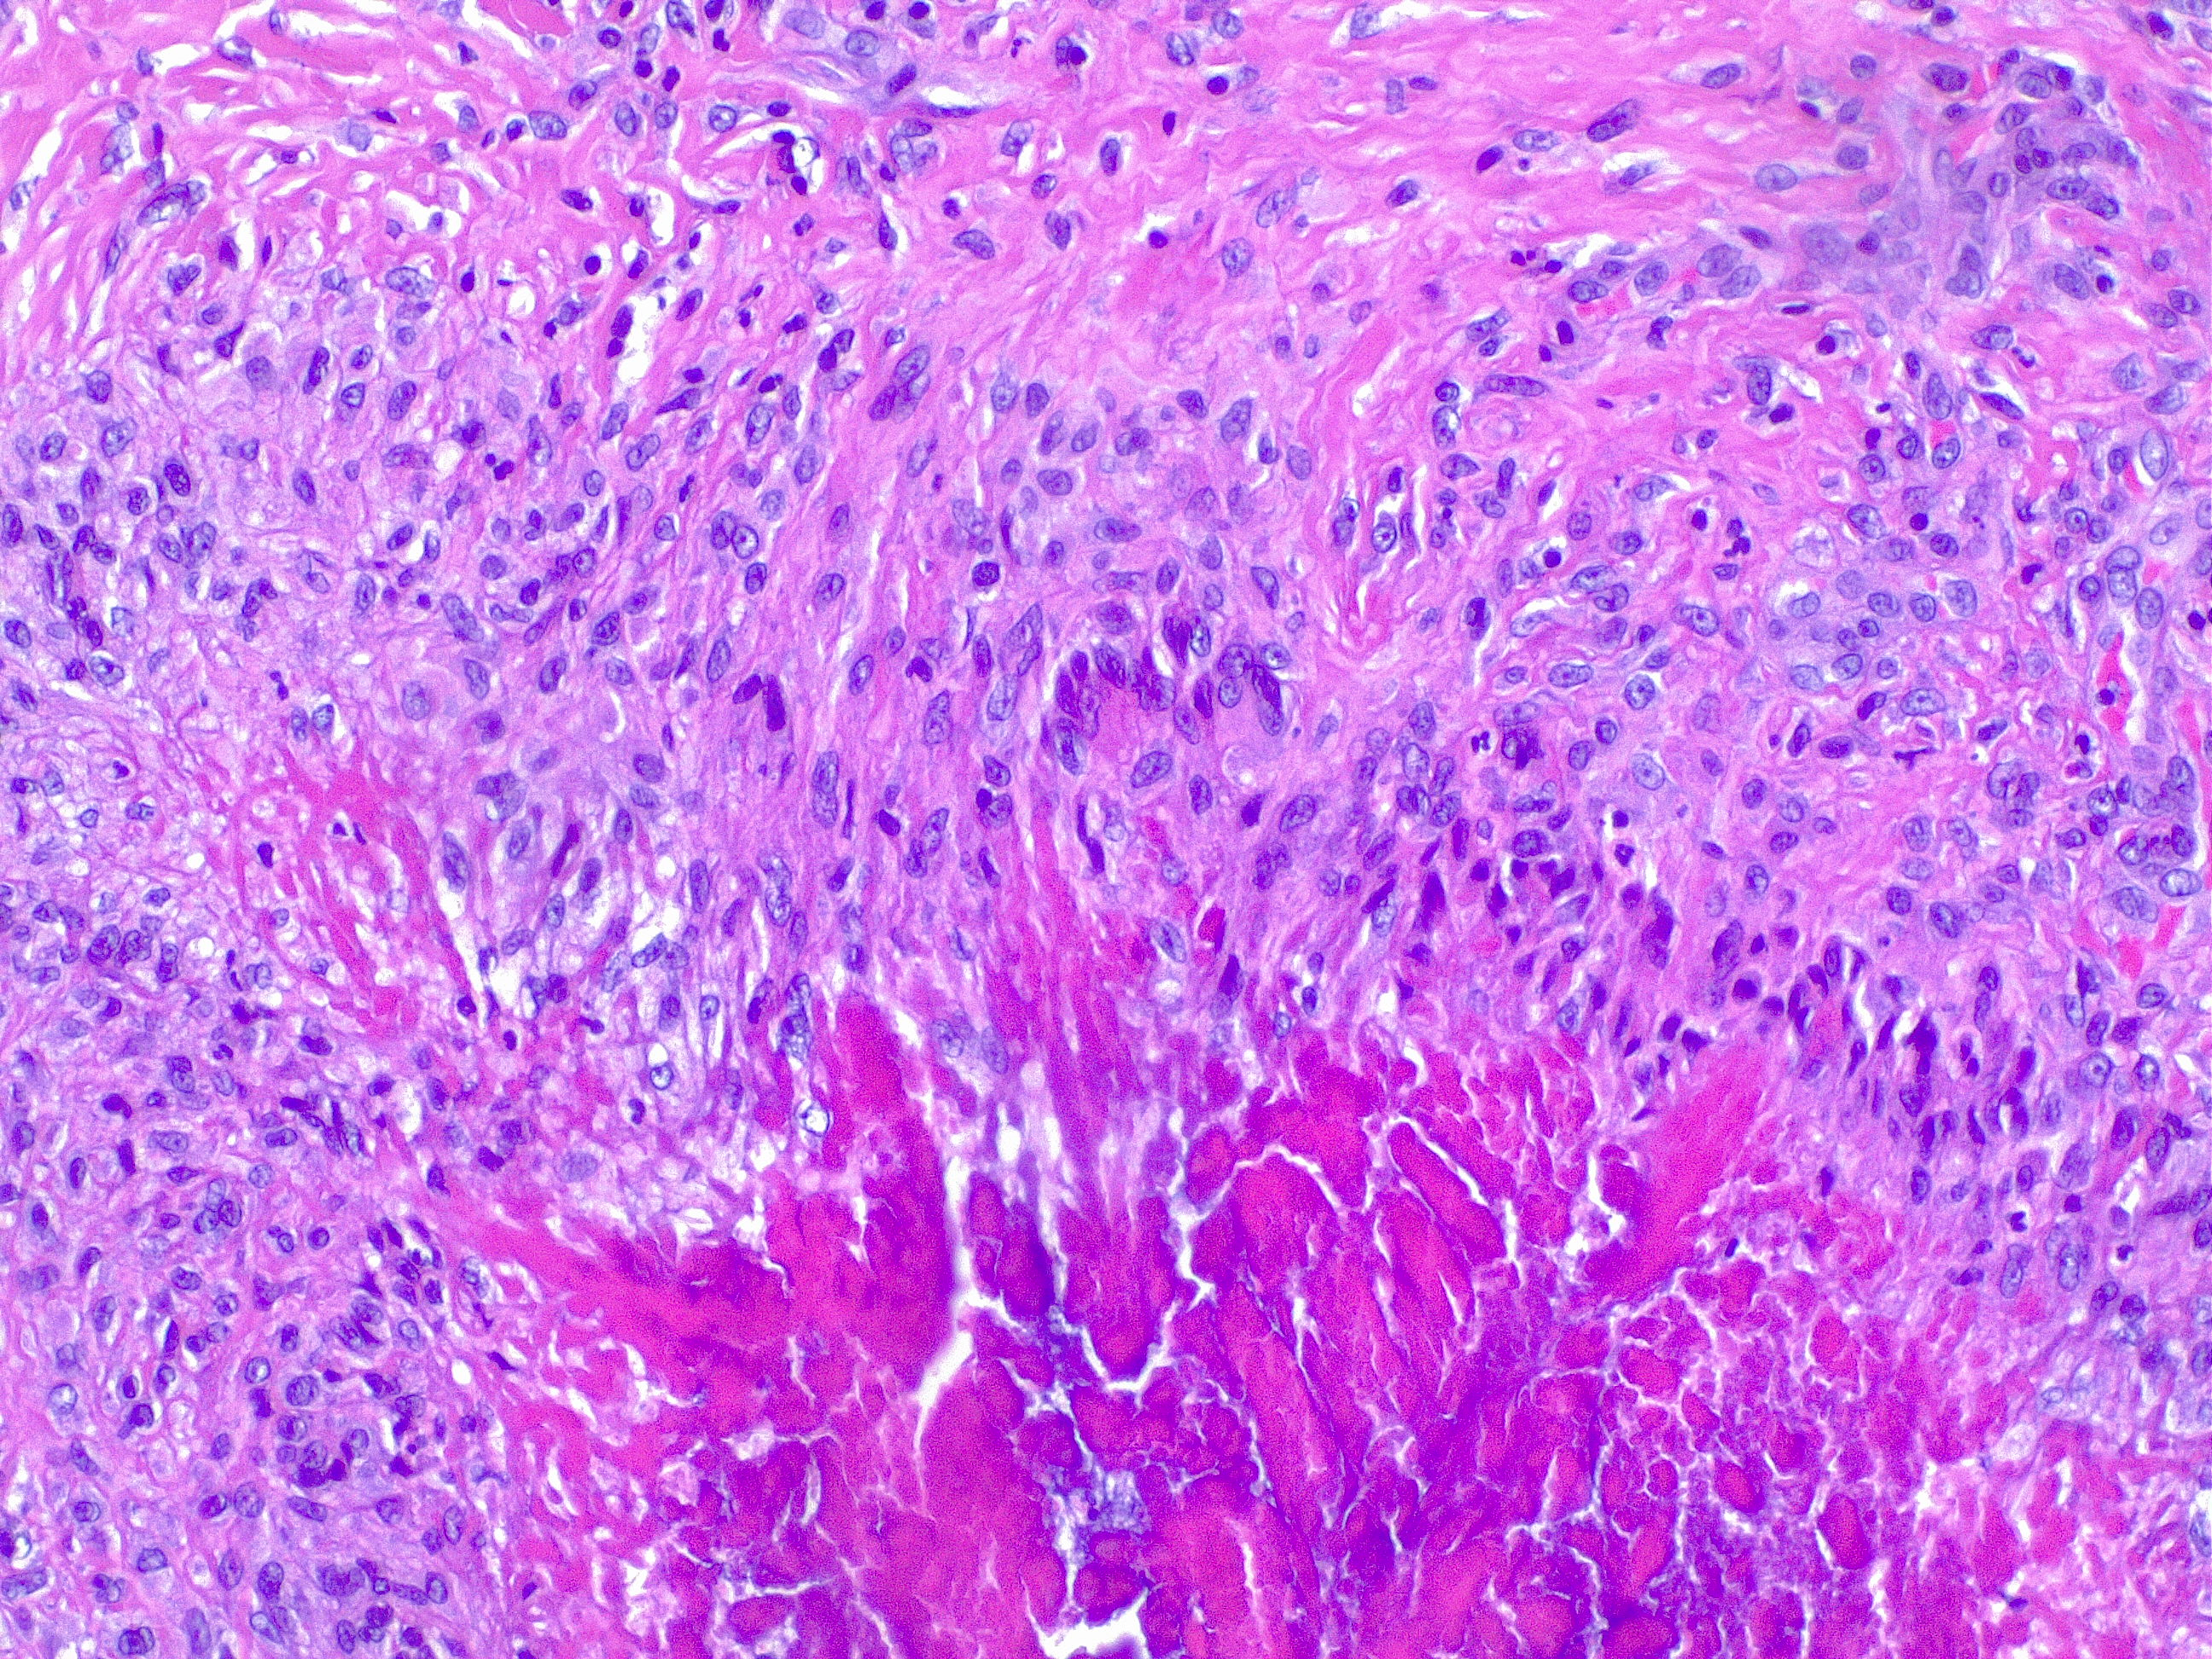 Granuloma annulare, H/E 20x. Palizading histiocytes and lymphocytes surround an area of necrobiotic collagen.